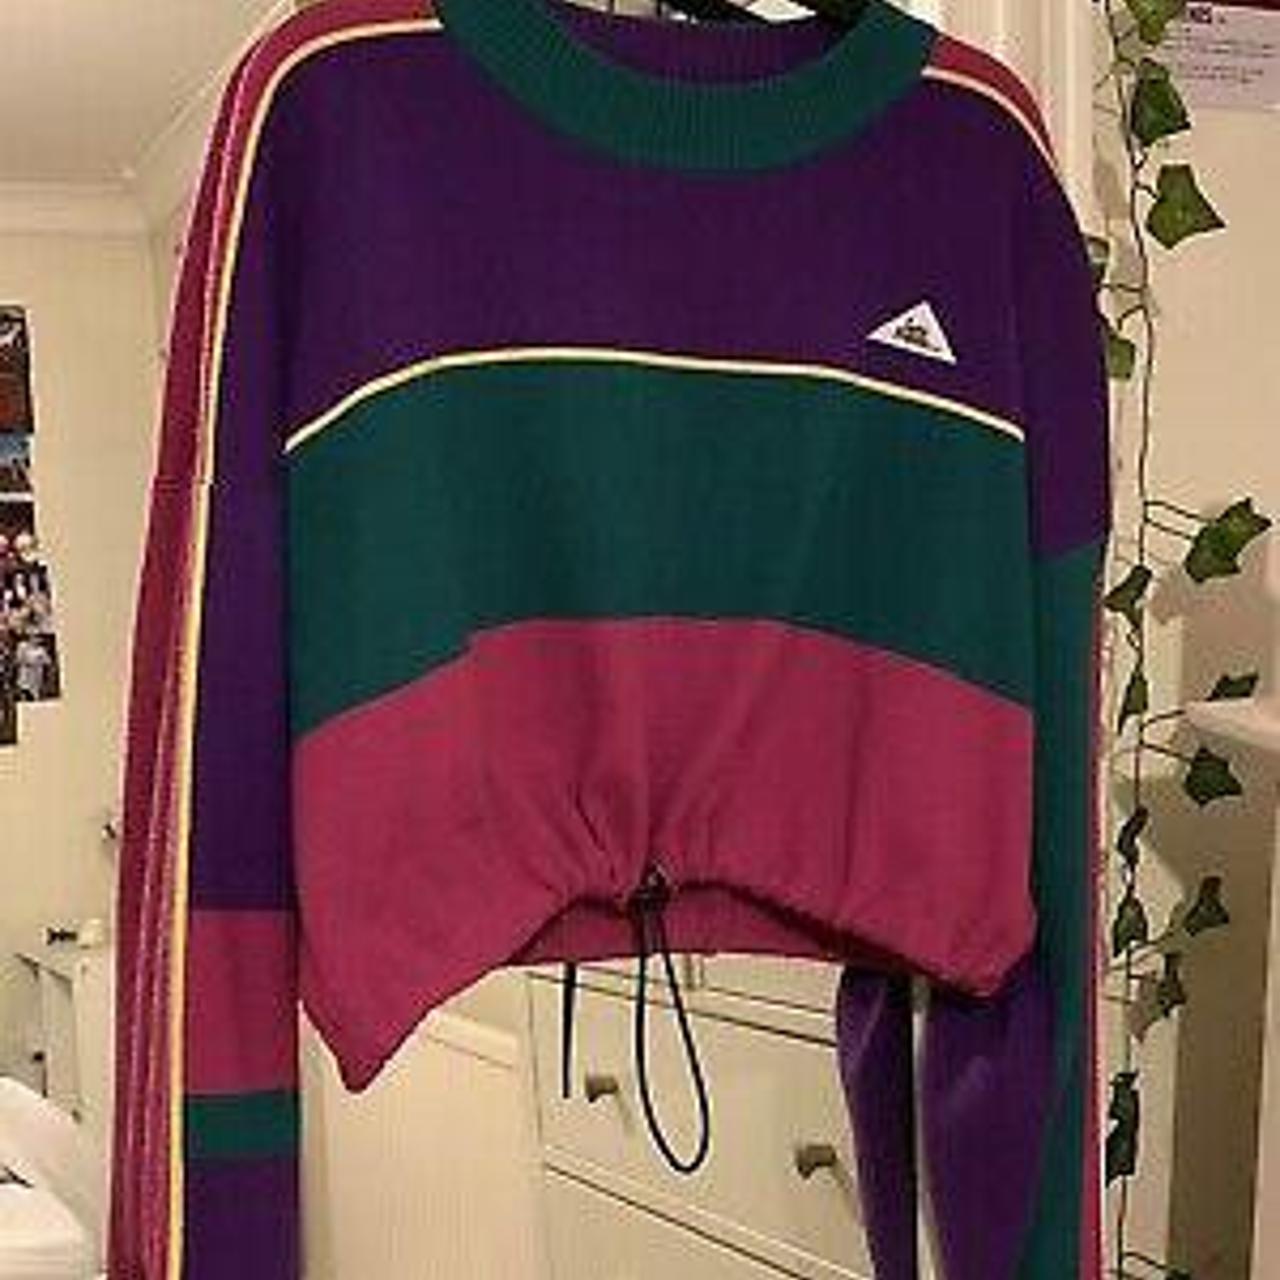 Urban Outfitters Women's Purple and Pink Sweatshirt (4)